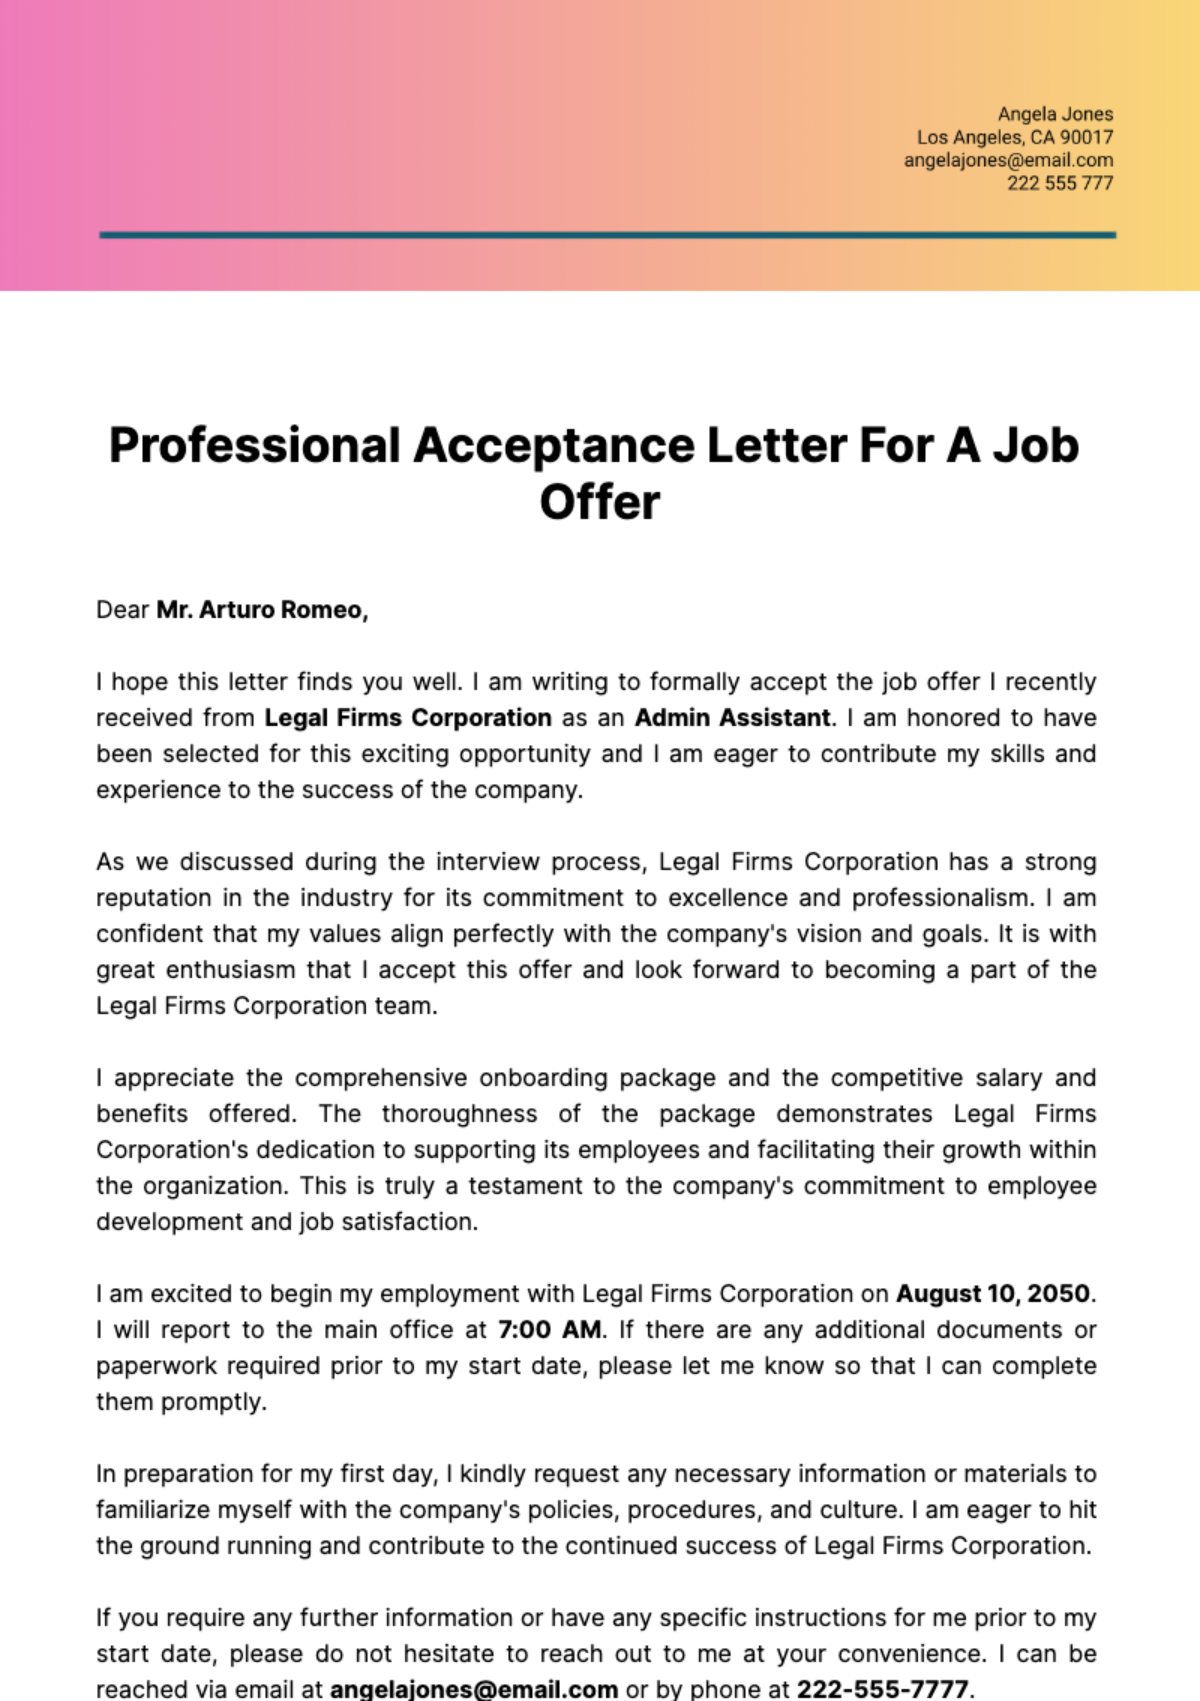 Free Professional Acceptance Letter for a Job Offer Template